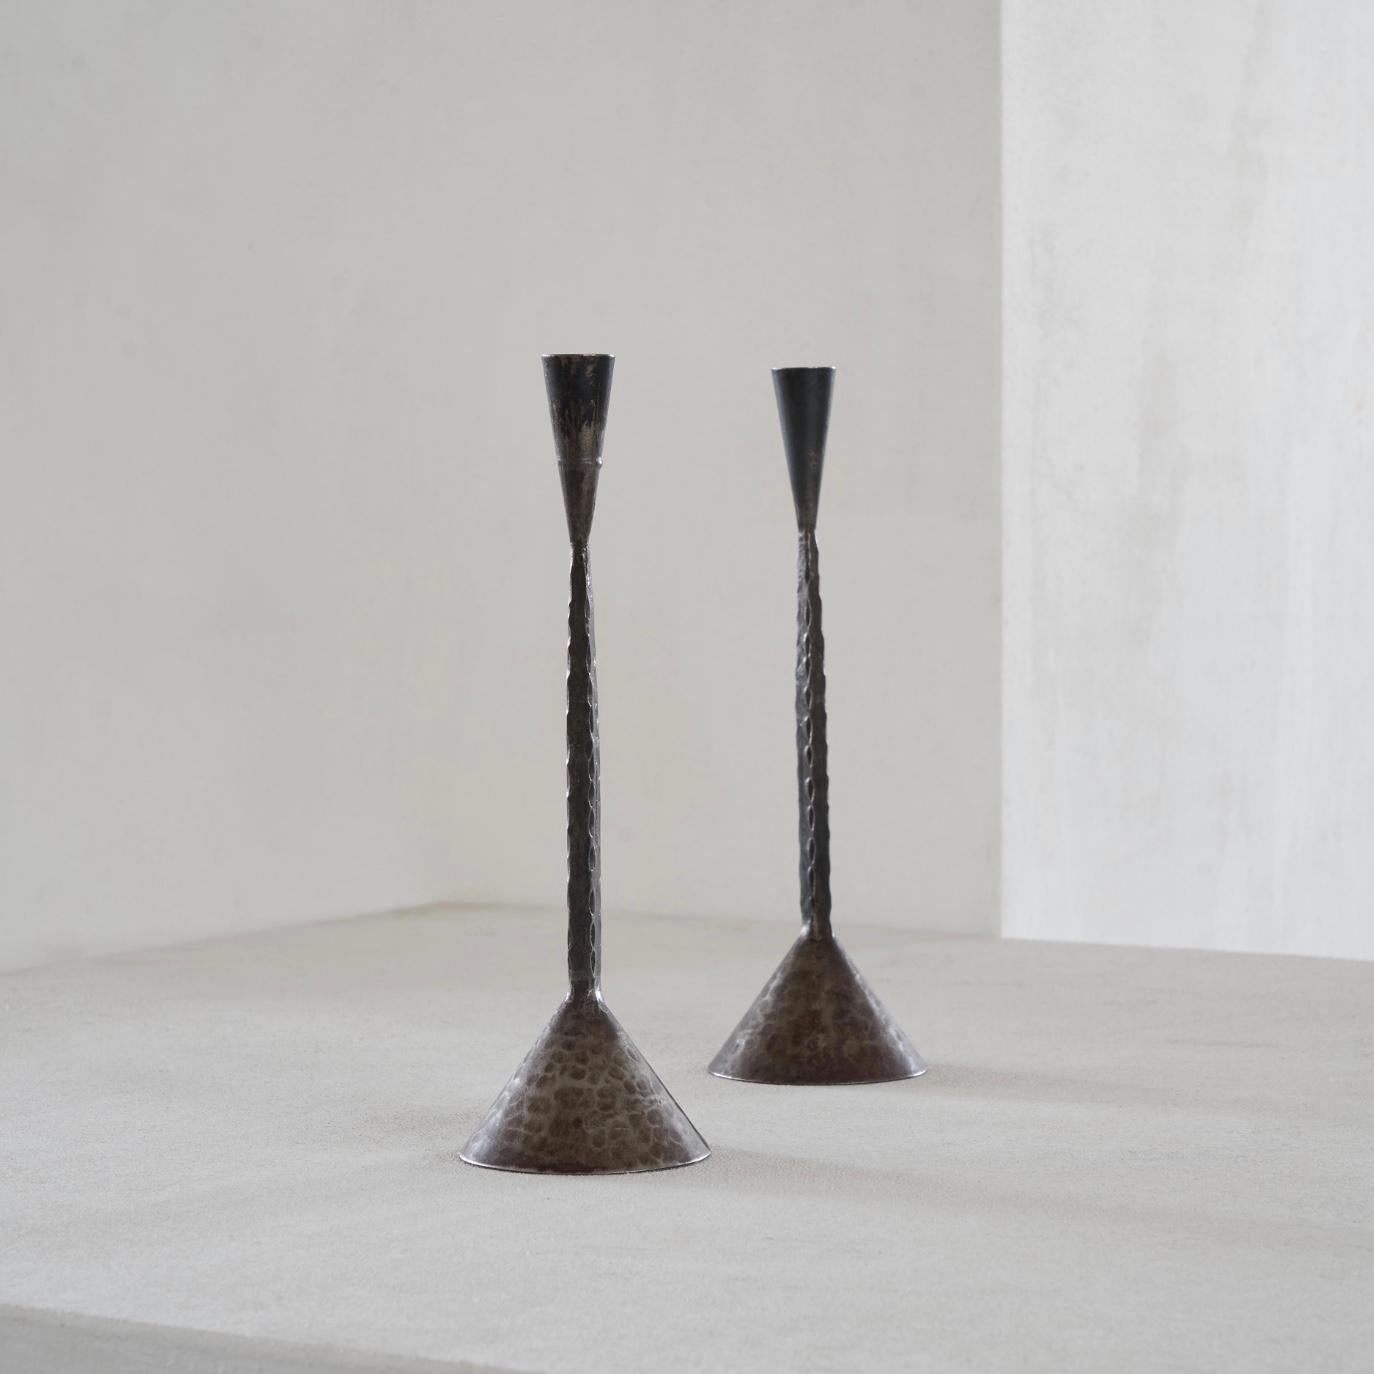 Pair of hand hammered mid-century brutalist candlesticks, mid 20th century, Sweden.

Very elegant and simple pair of candlesticks with perfect proportions and great details. Wonderful combined with natural materials like wood, but also a great